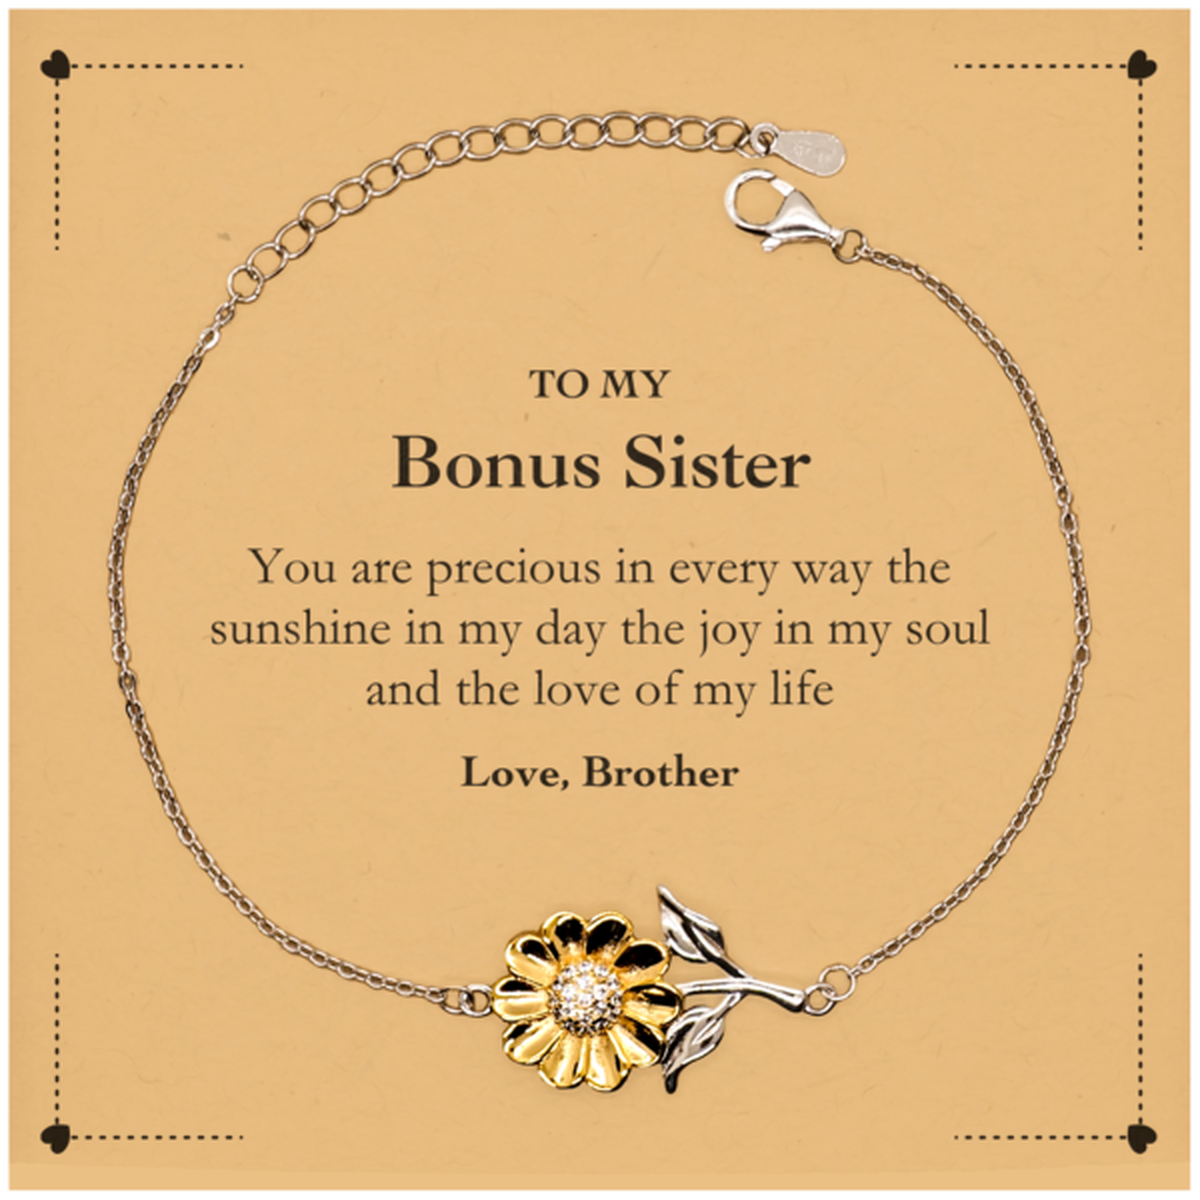 Graduation Gifts for Bonus Sister Sunflower Bracelet Present from Brother, Christmas Bonus Sister Birthday Gifts Bonus Sister You are precious in every way the sunshine in my day. Love, Brother